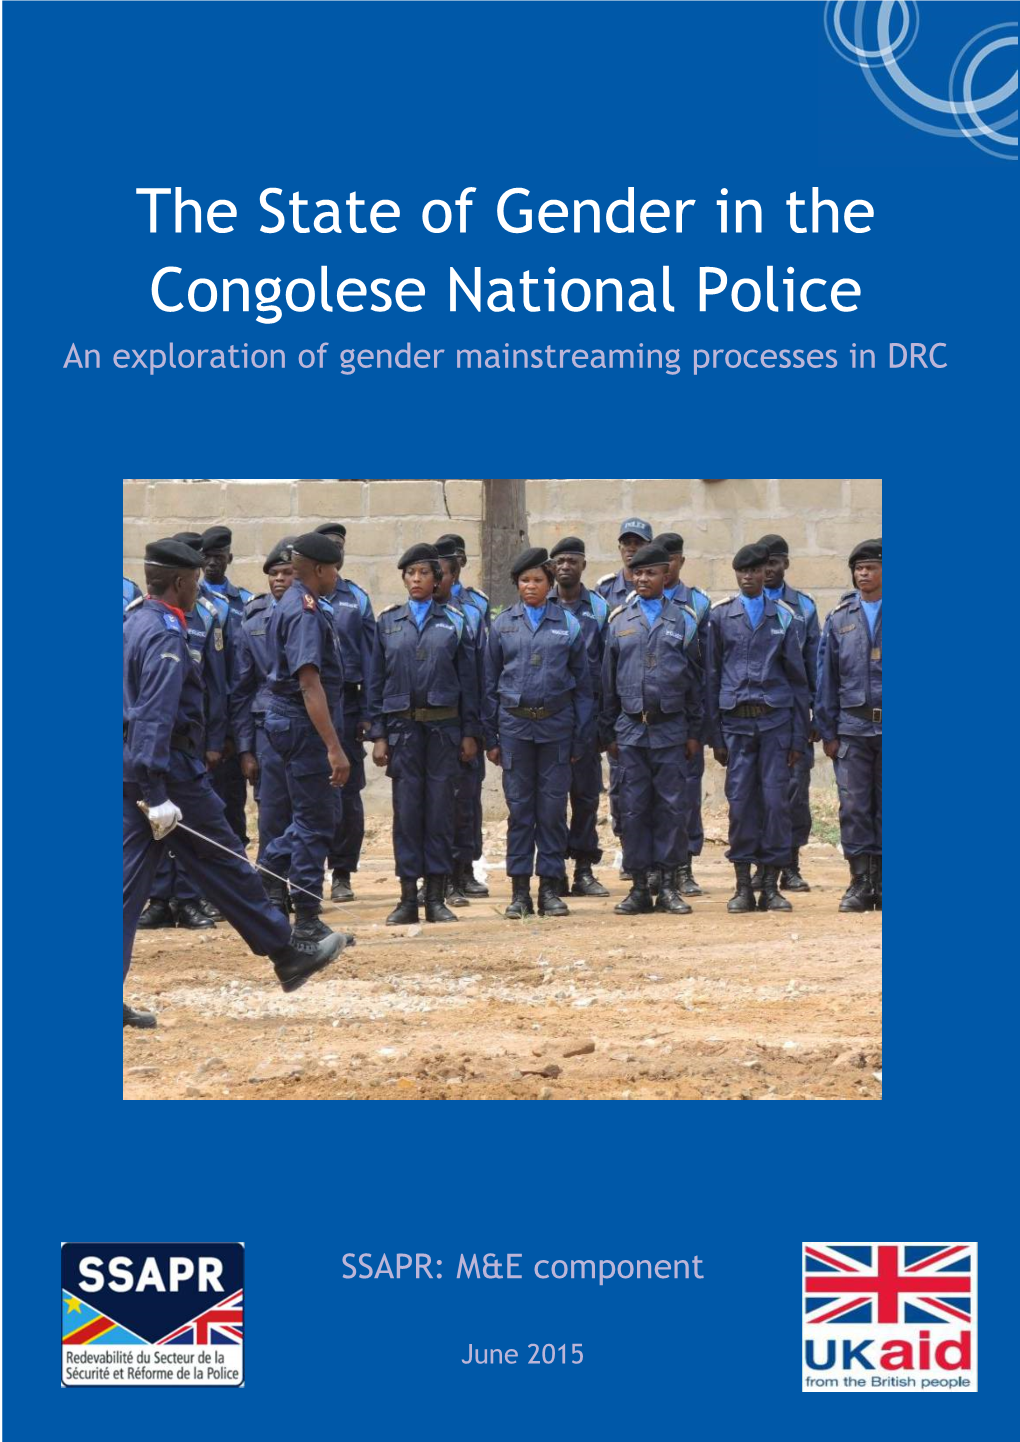 The State of Gender in the Congolese National Police an Exploration of Gender Mainstreaming Processes in DRC